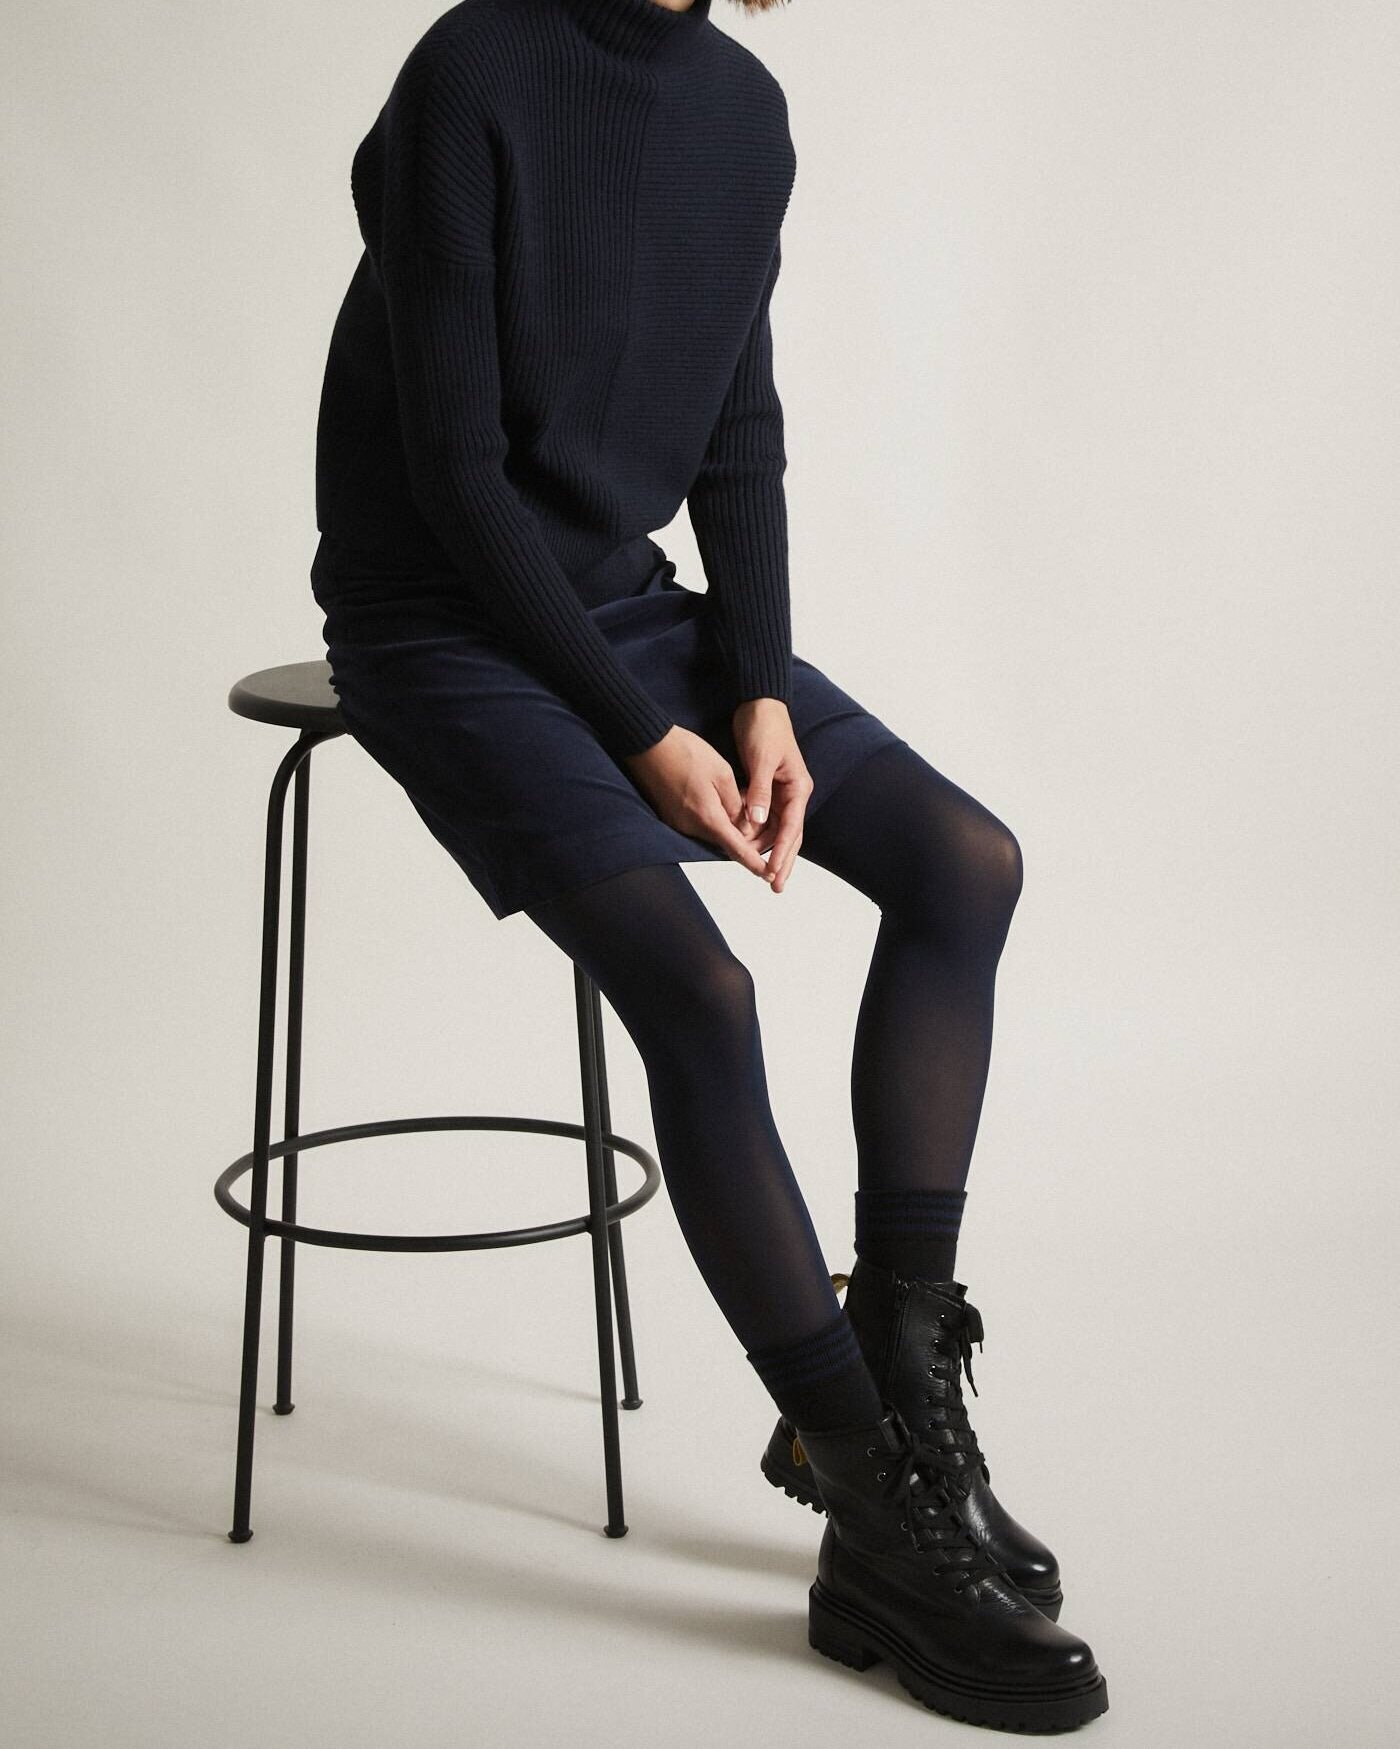 7 Sustainable Hosiery Brands with Eco-Friendly Tights